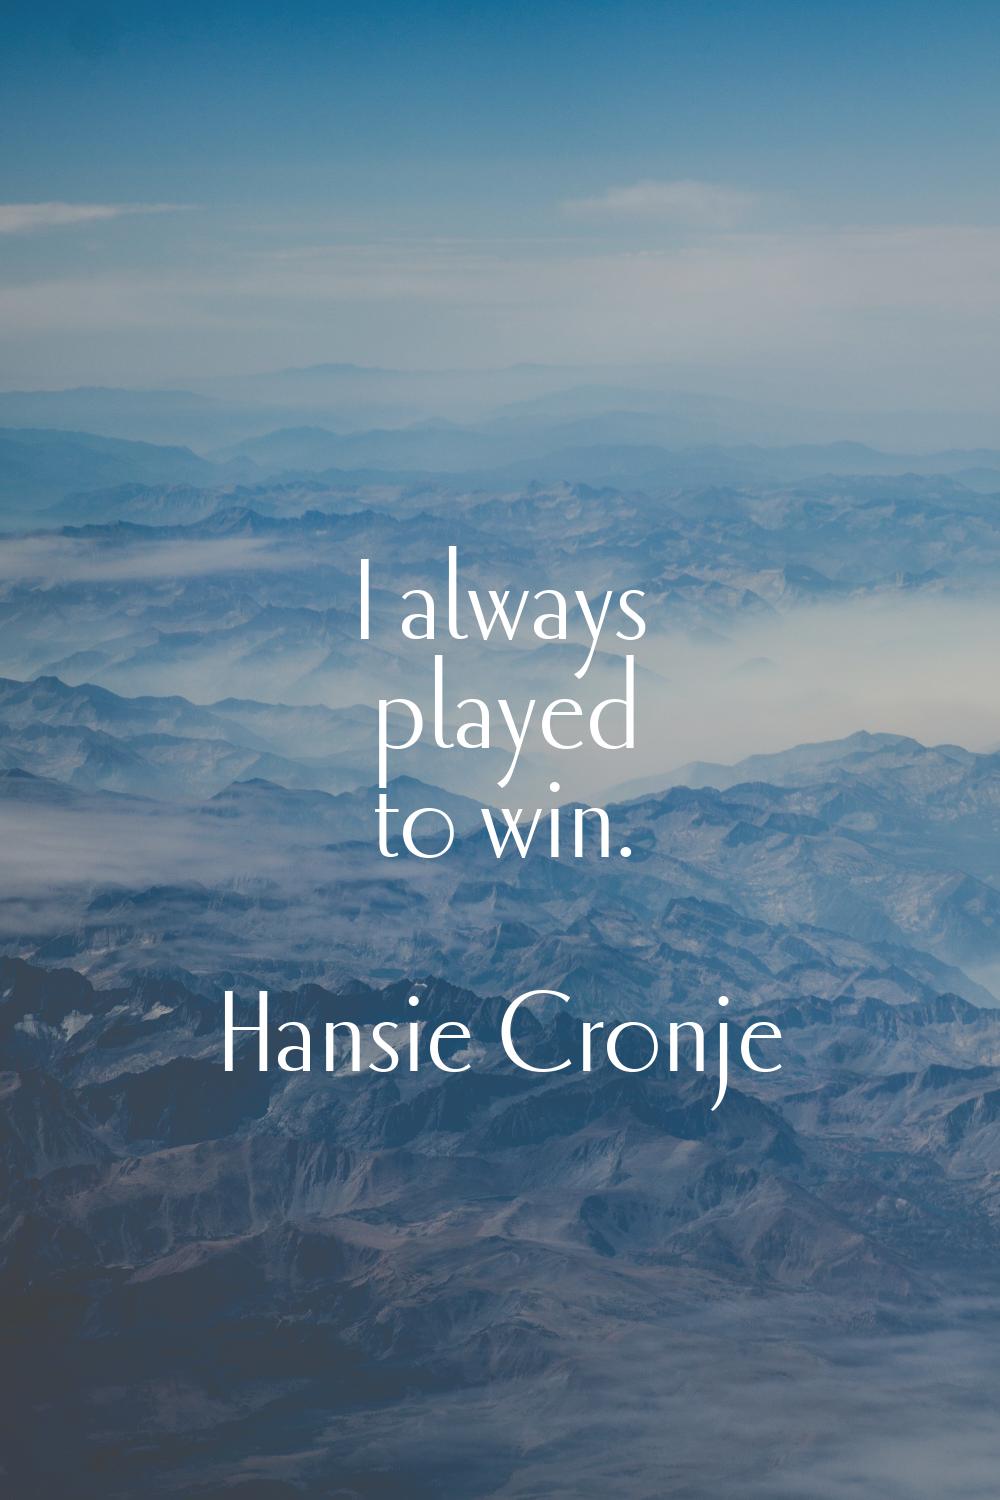 I always played to win.